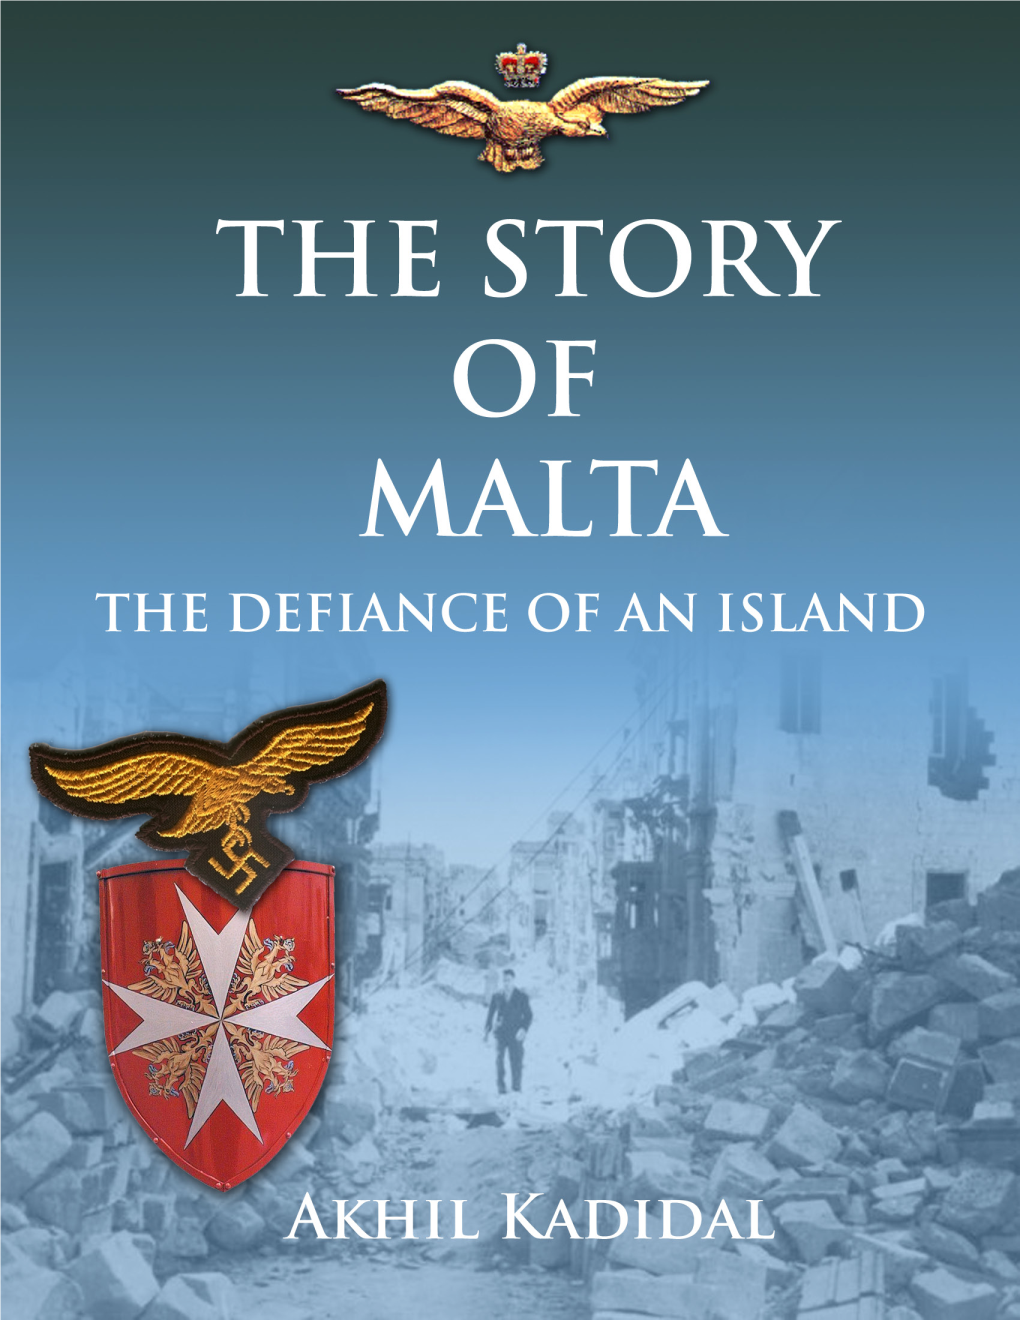 The Story of Malta the Aerial Siege of the Island, 1940-1942 PREFACE